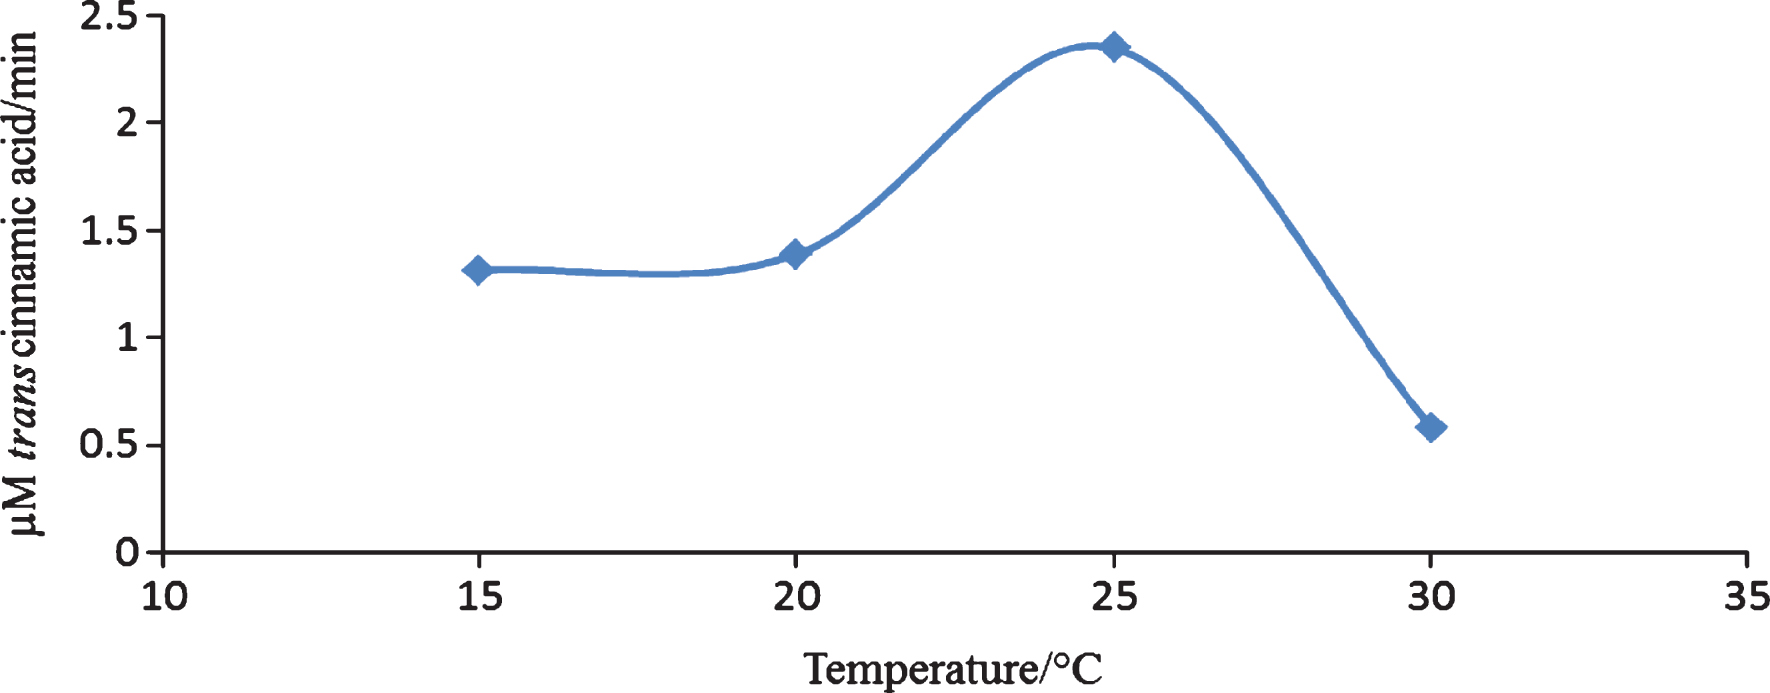 Temperature dependence studies on the PAL enzyme from C. sicyoides.